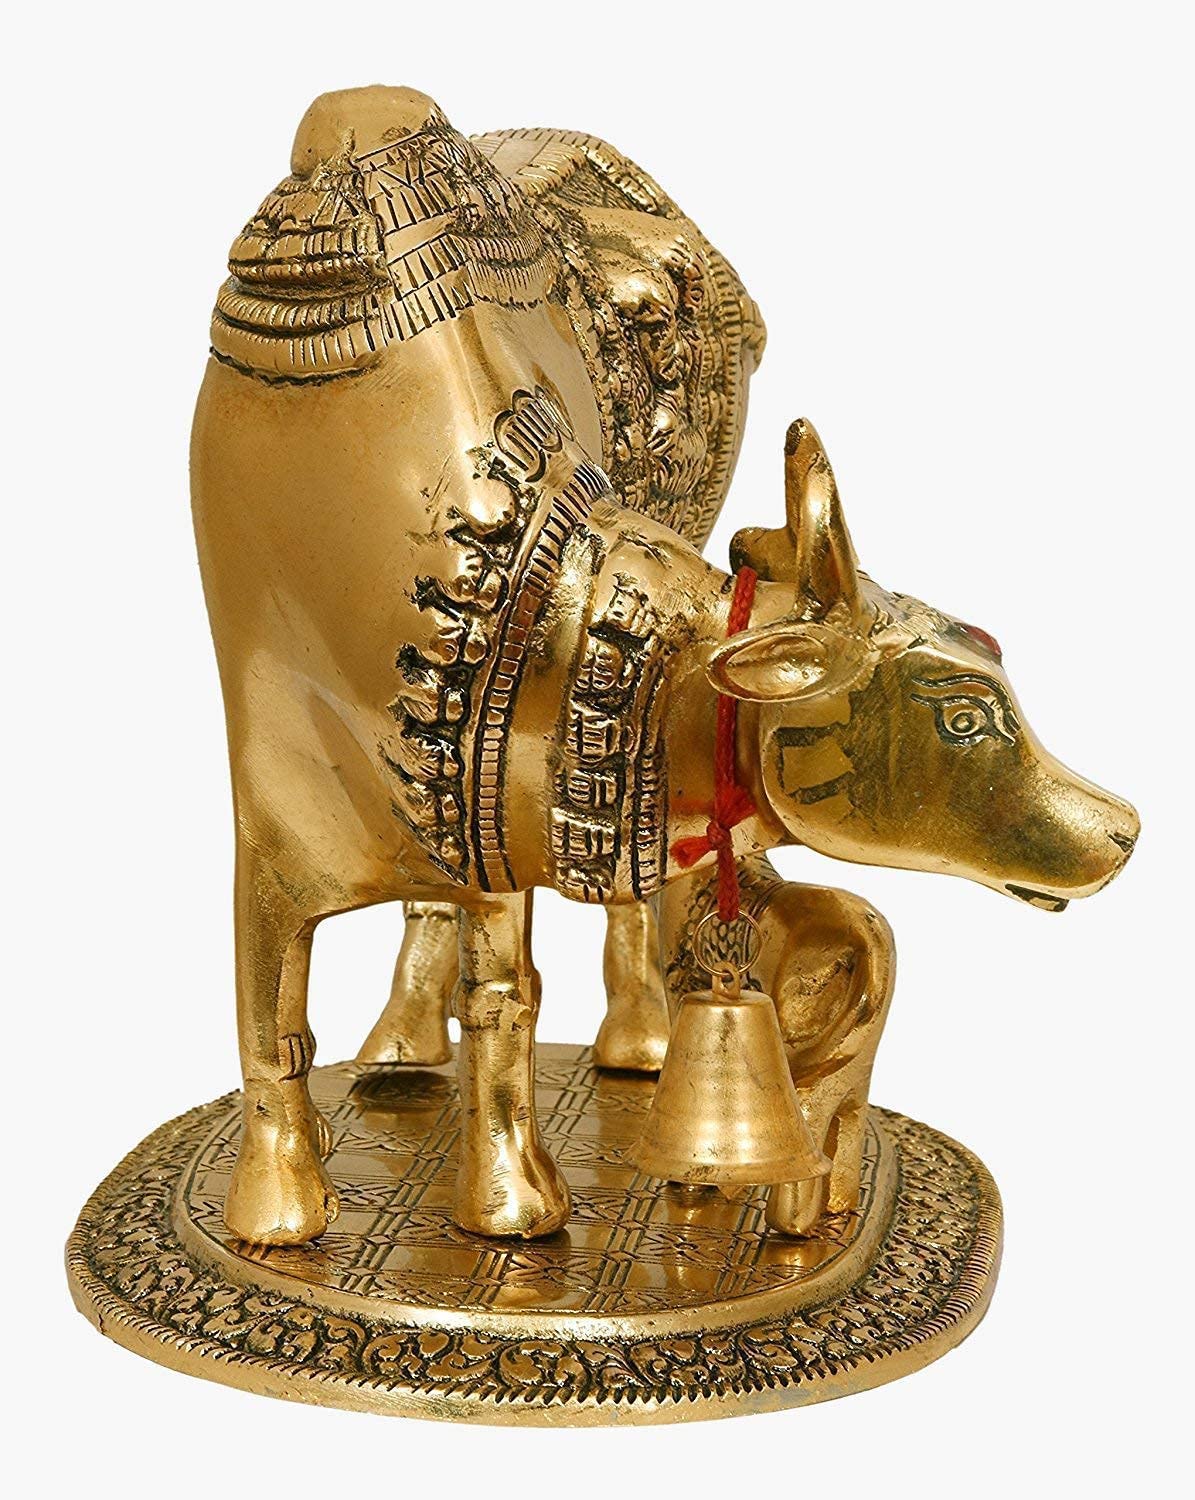 280 Rs each on buying 🏷in bulk | Call 📞 at 8619550223 Kamdhenu Cow and Calf Showpiece LAMANSH® Golden Plated Kamdhenu Cow and Calf Statues for Return Gifting 🎁 in Pooja & Wedding ceremony